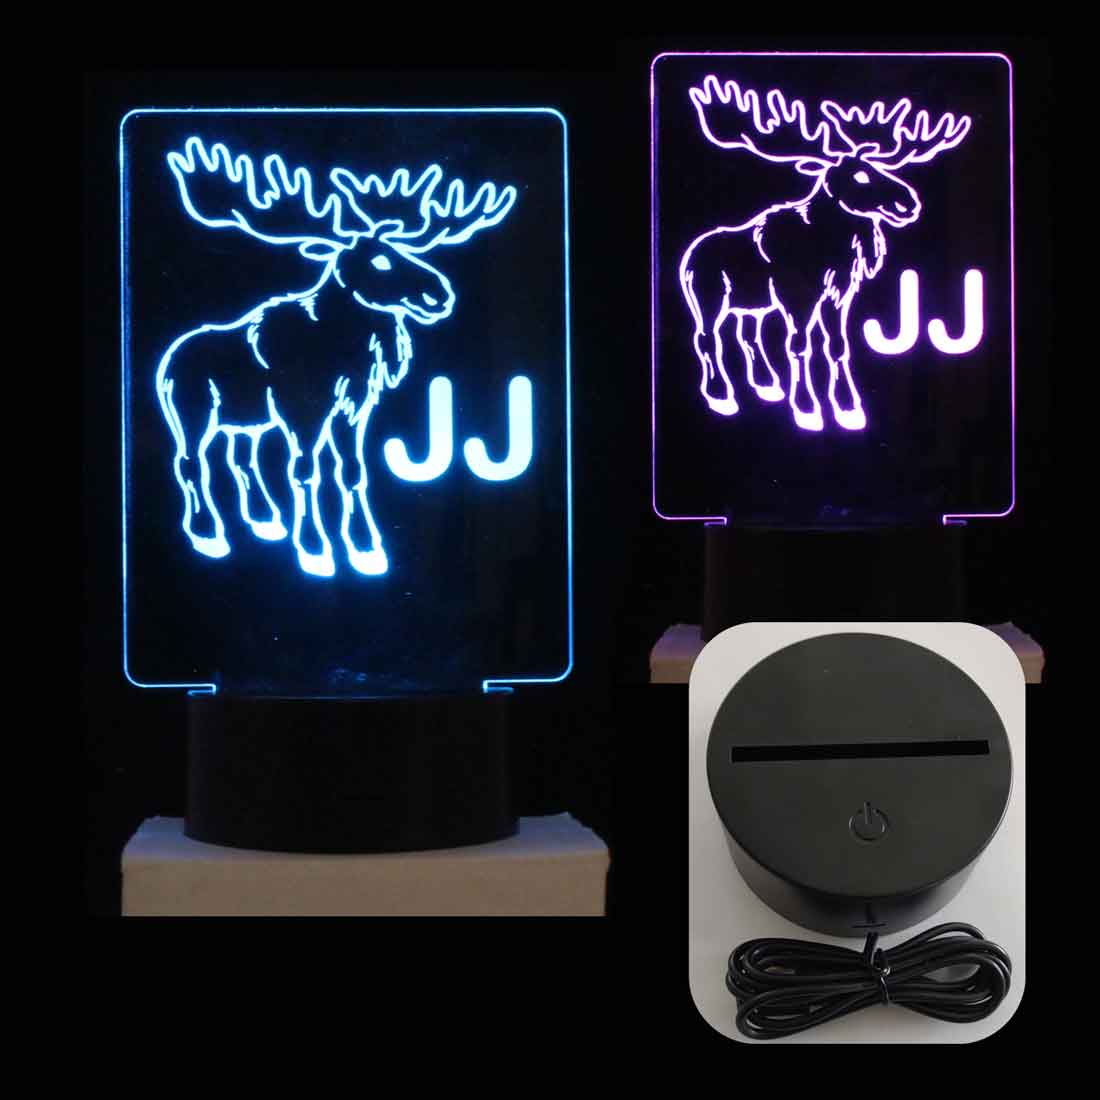 Personalized Moose night light, Name night light, Gift for boys